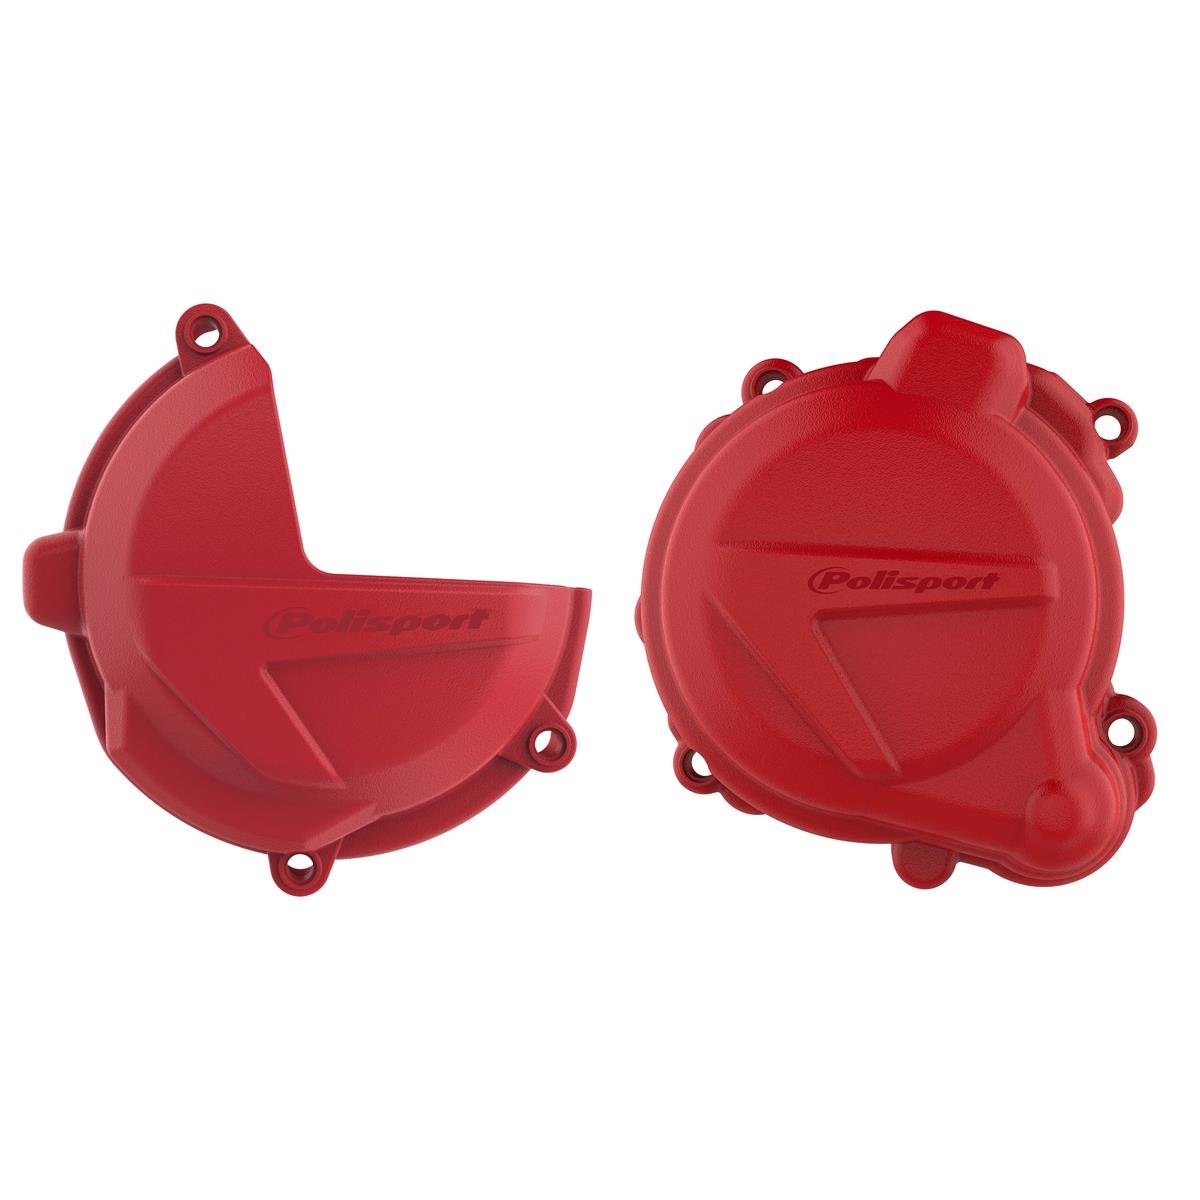 Polisport Clutch/Ignition Cover Protection  Beta RR 250/300 2T 18-19, Xtrainer 18-19, Red